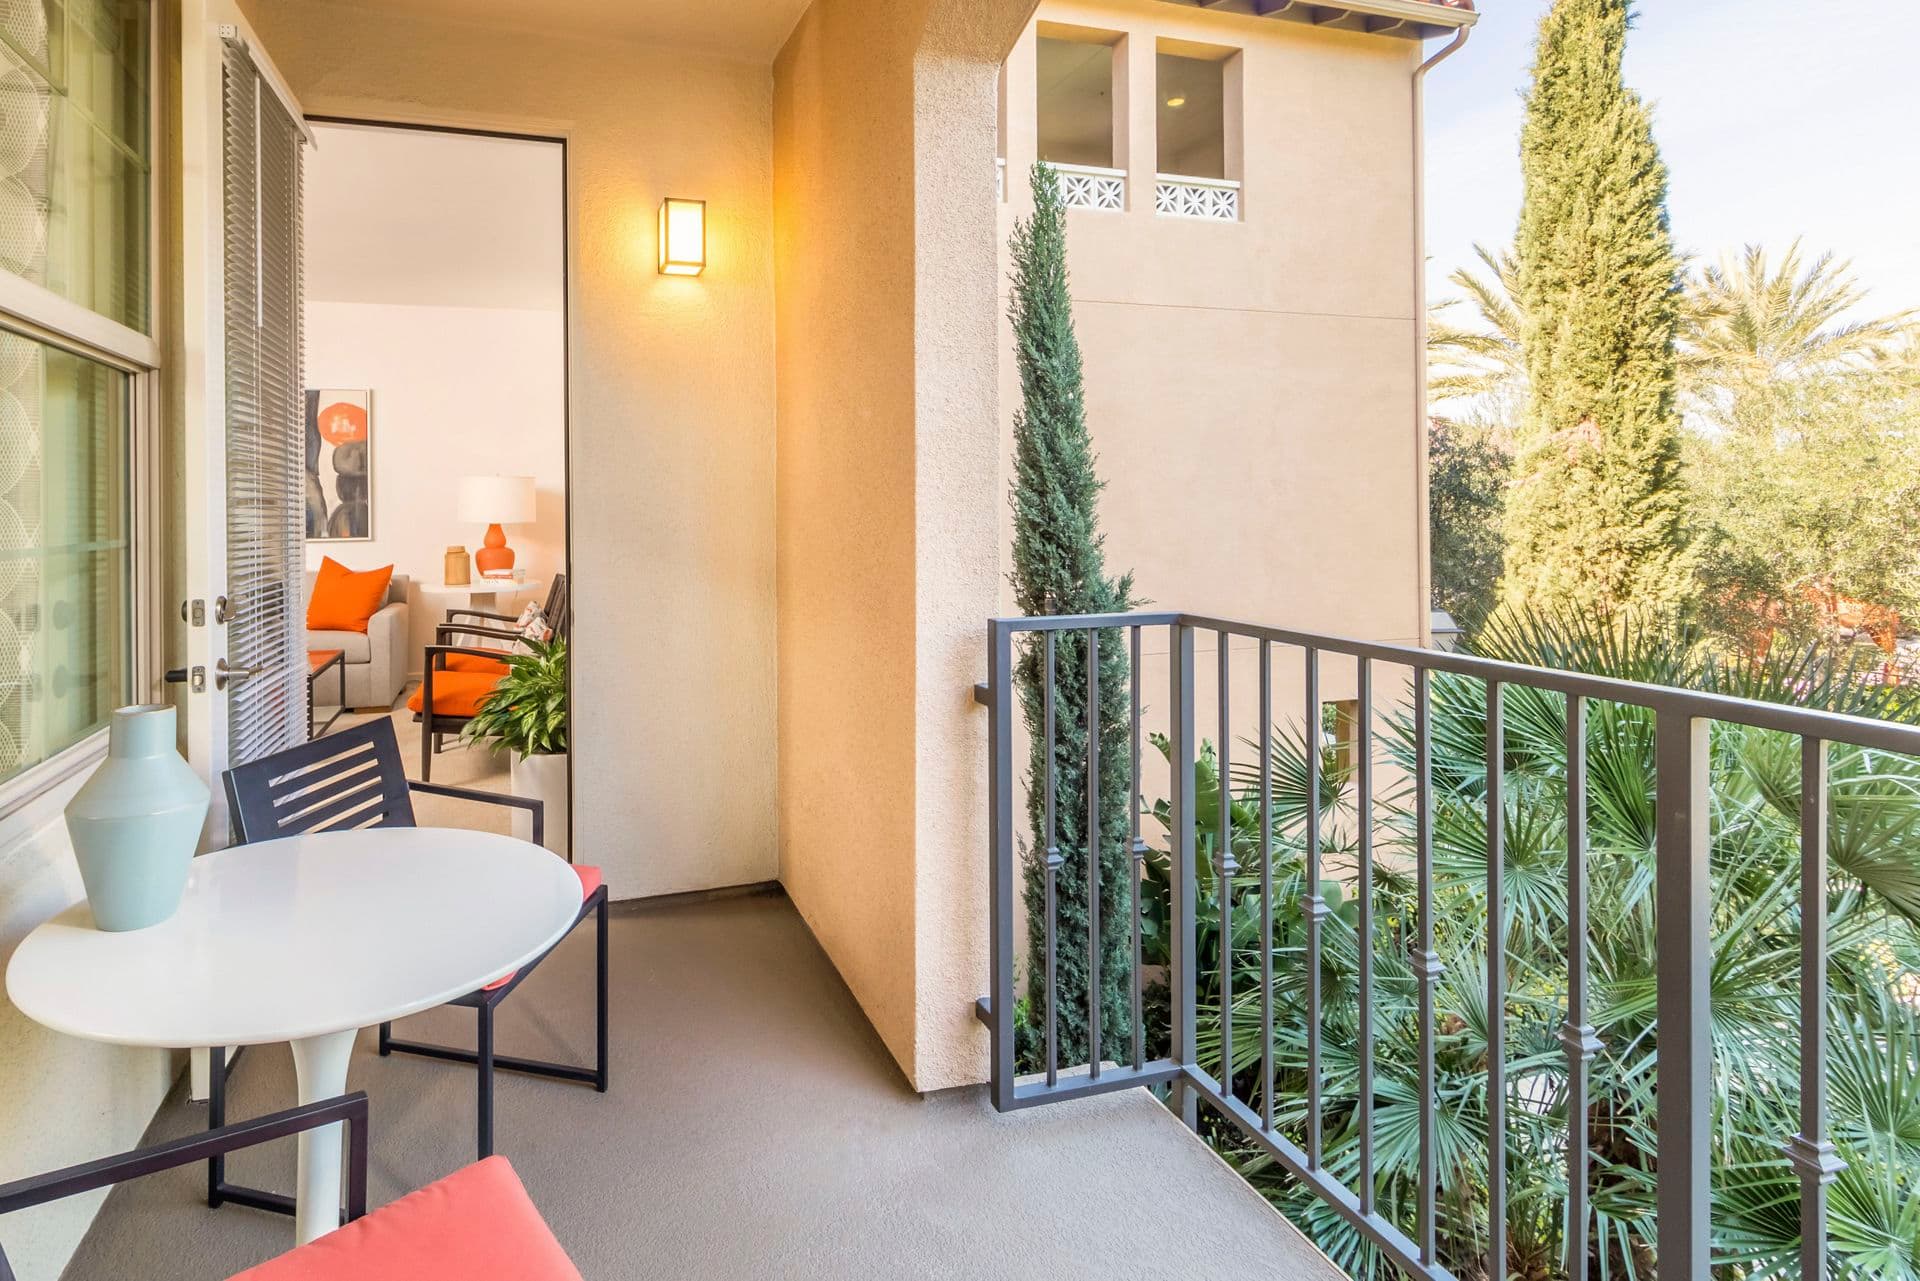 Interior view of balcony at of Avella Apartment Homes in Irvine, CA.